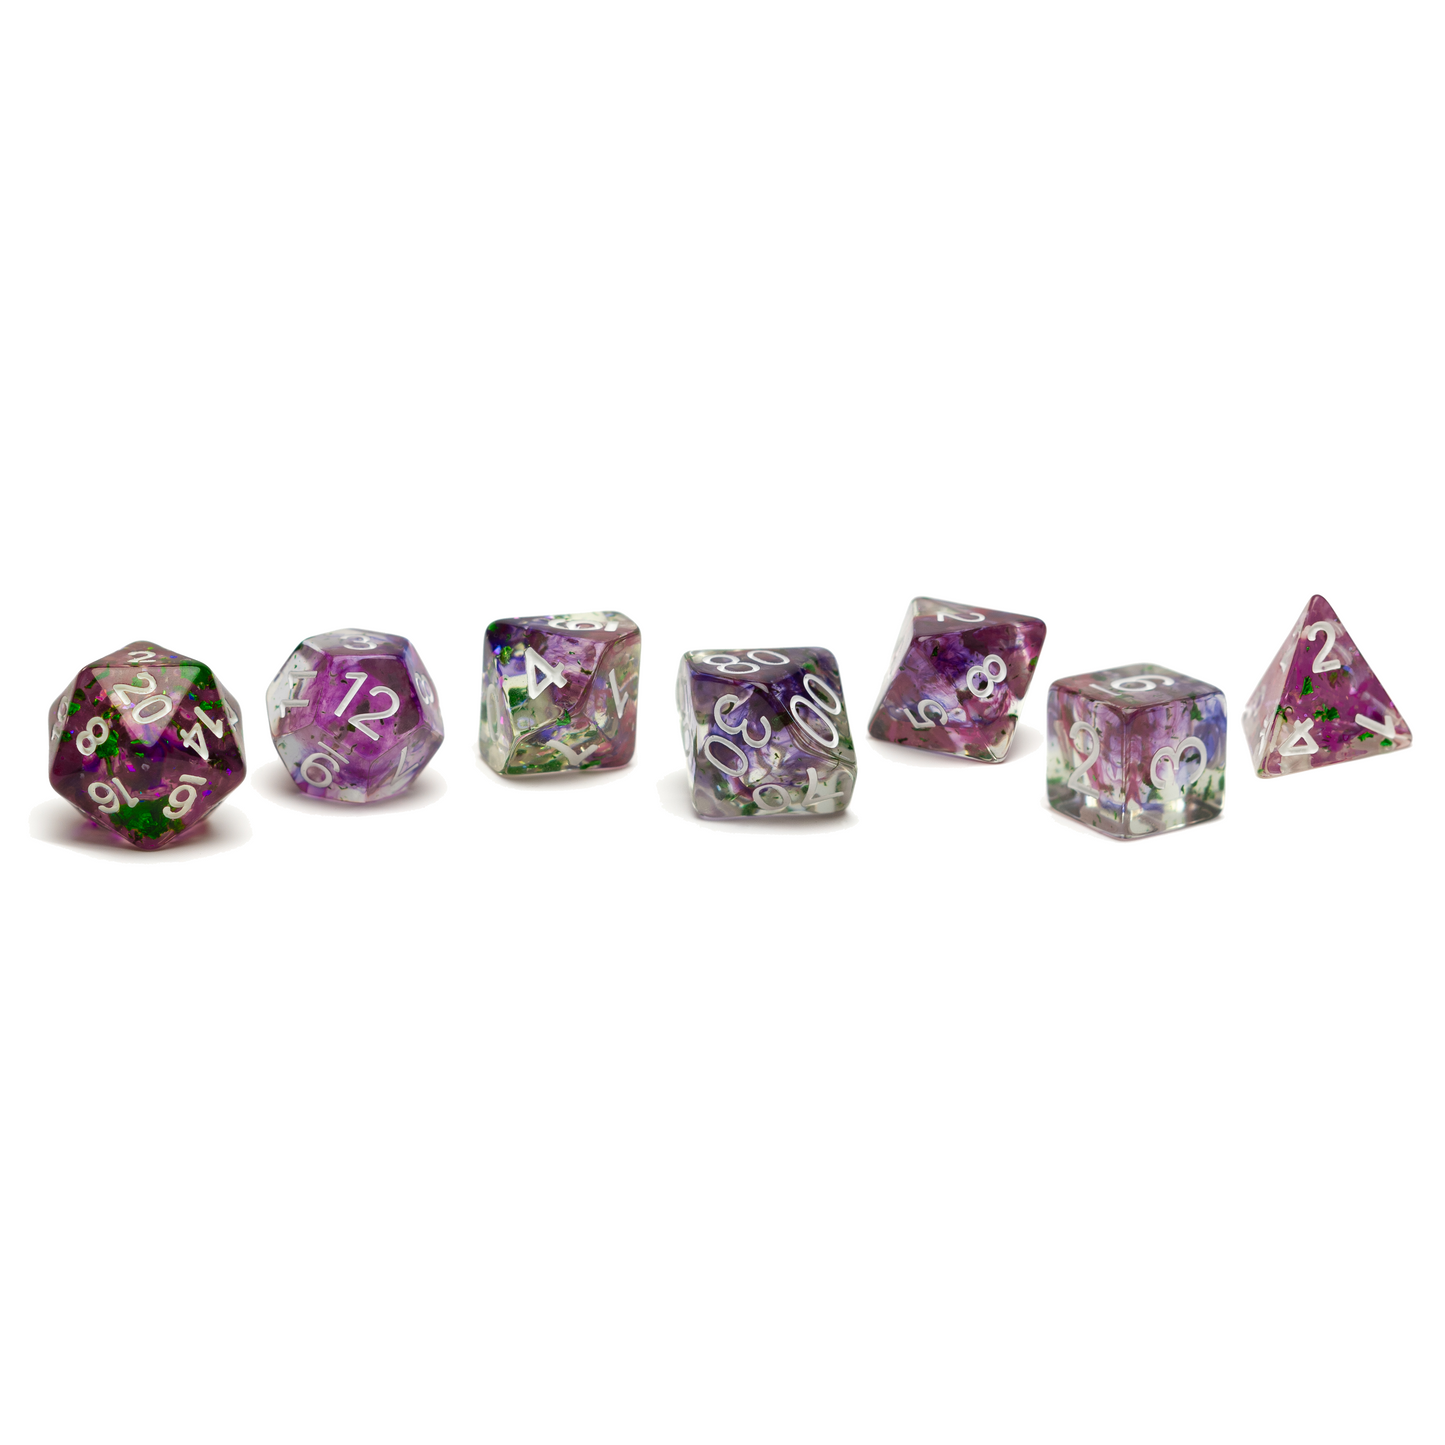 Roll Britannia Malrus and Milo Tosscobble Dungeons and Dragons Dice Set with Swirling Purple and Green Glitter Aesthetic